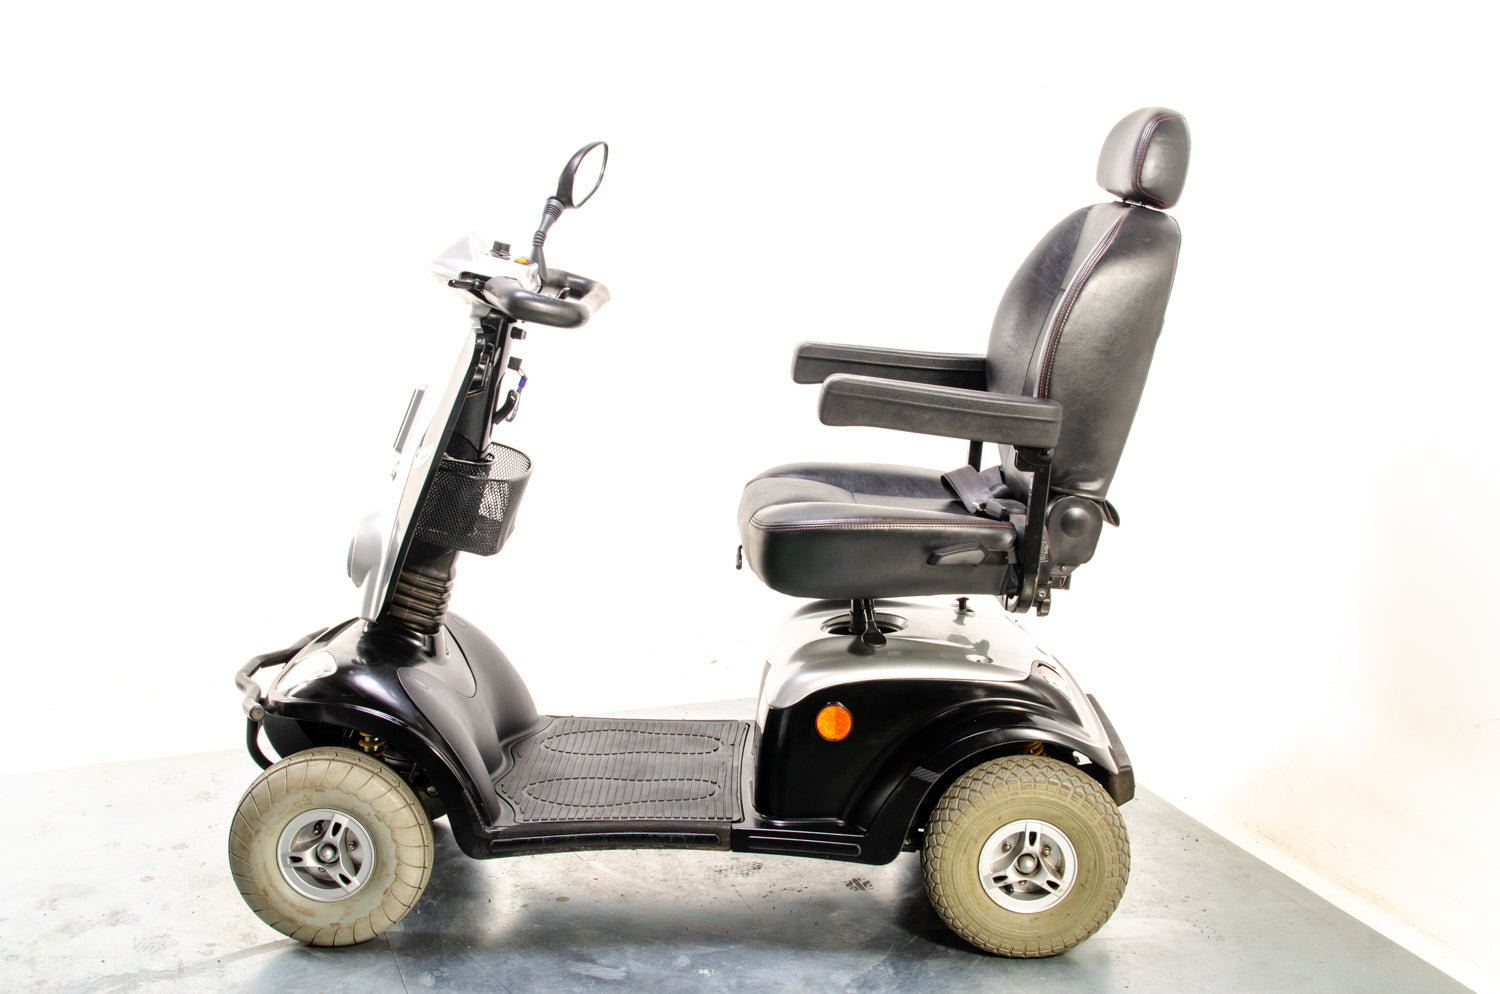 Kymco Maxi Off-Road All-Terrain Used Mobility Scooter 8mph Large Road Legal Black Silver